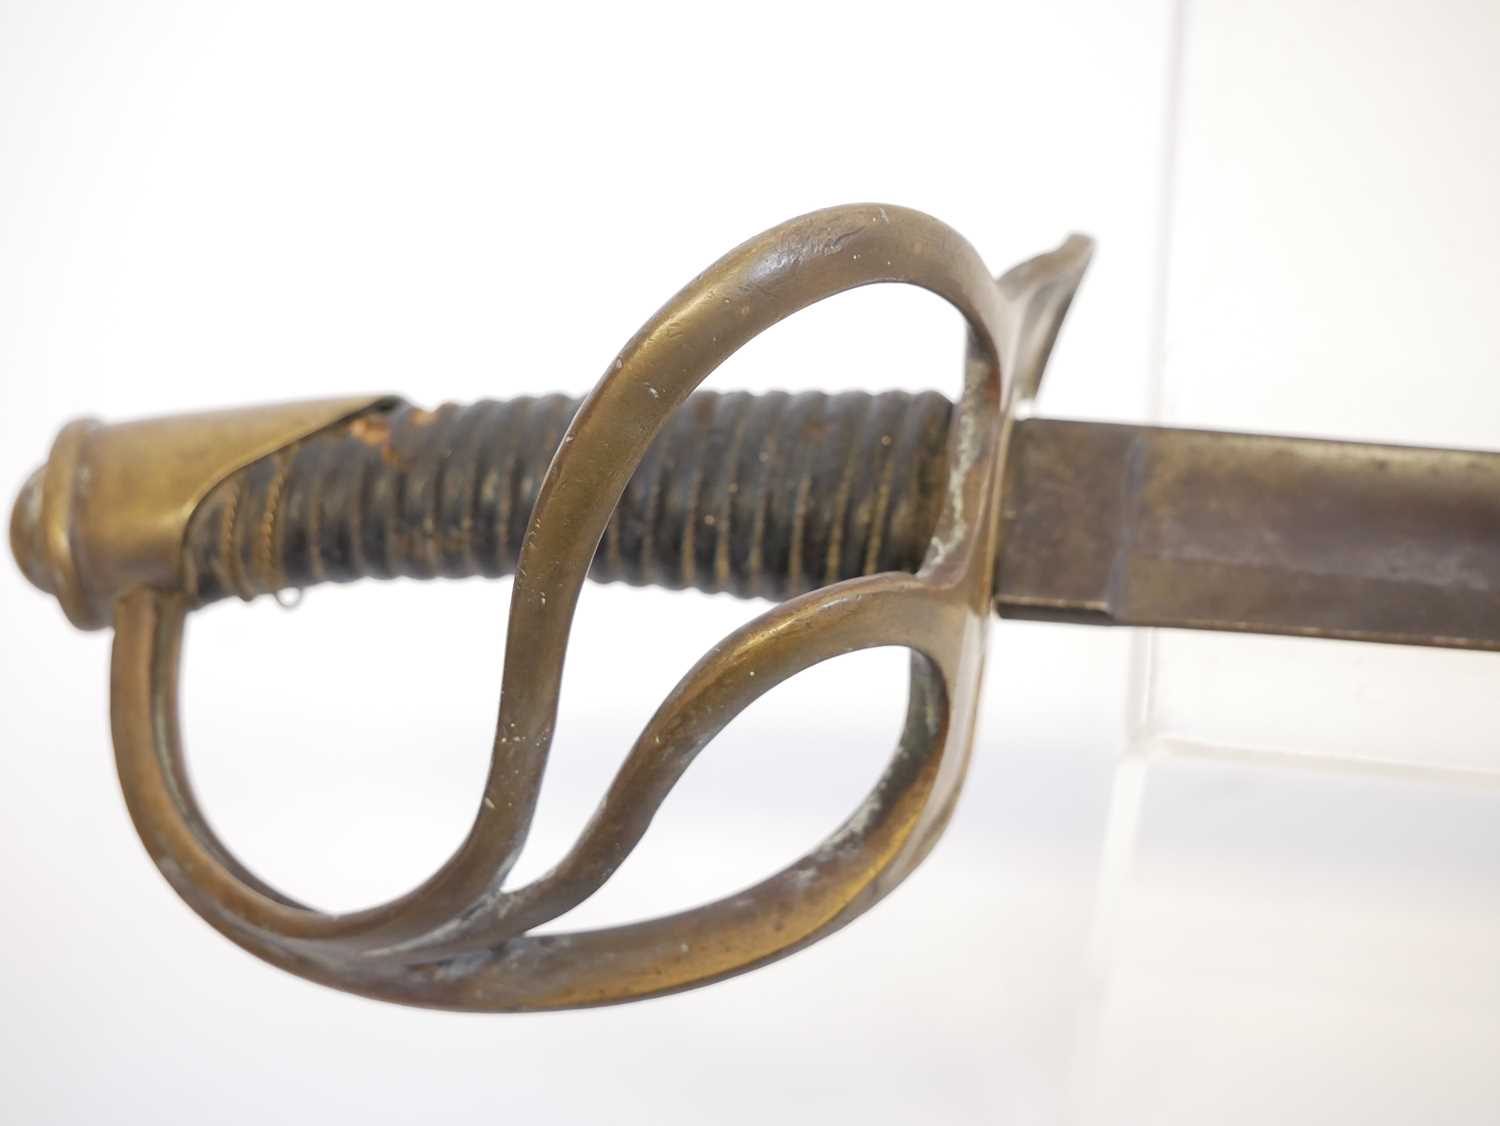 Model 1840 wrist breaker type sword, curved fullered blade with brass guard and leather covered - Image 2 of 13